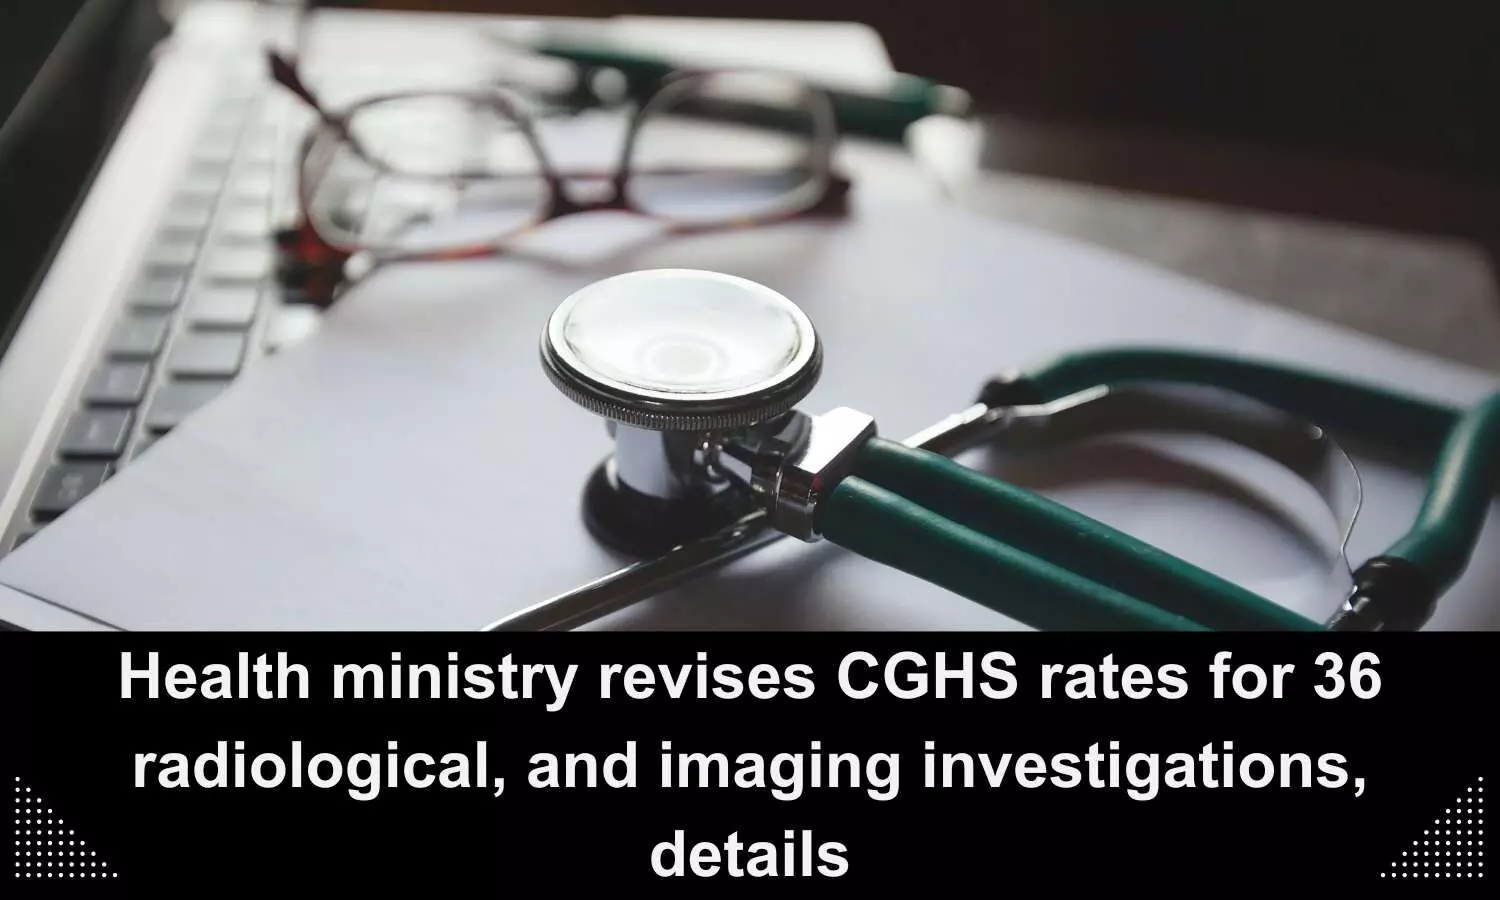 CGHS rates for 36 radiological, imaging investigations revised by Health Ministry